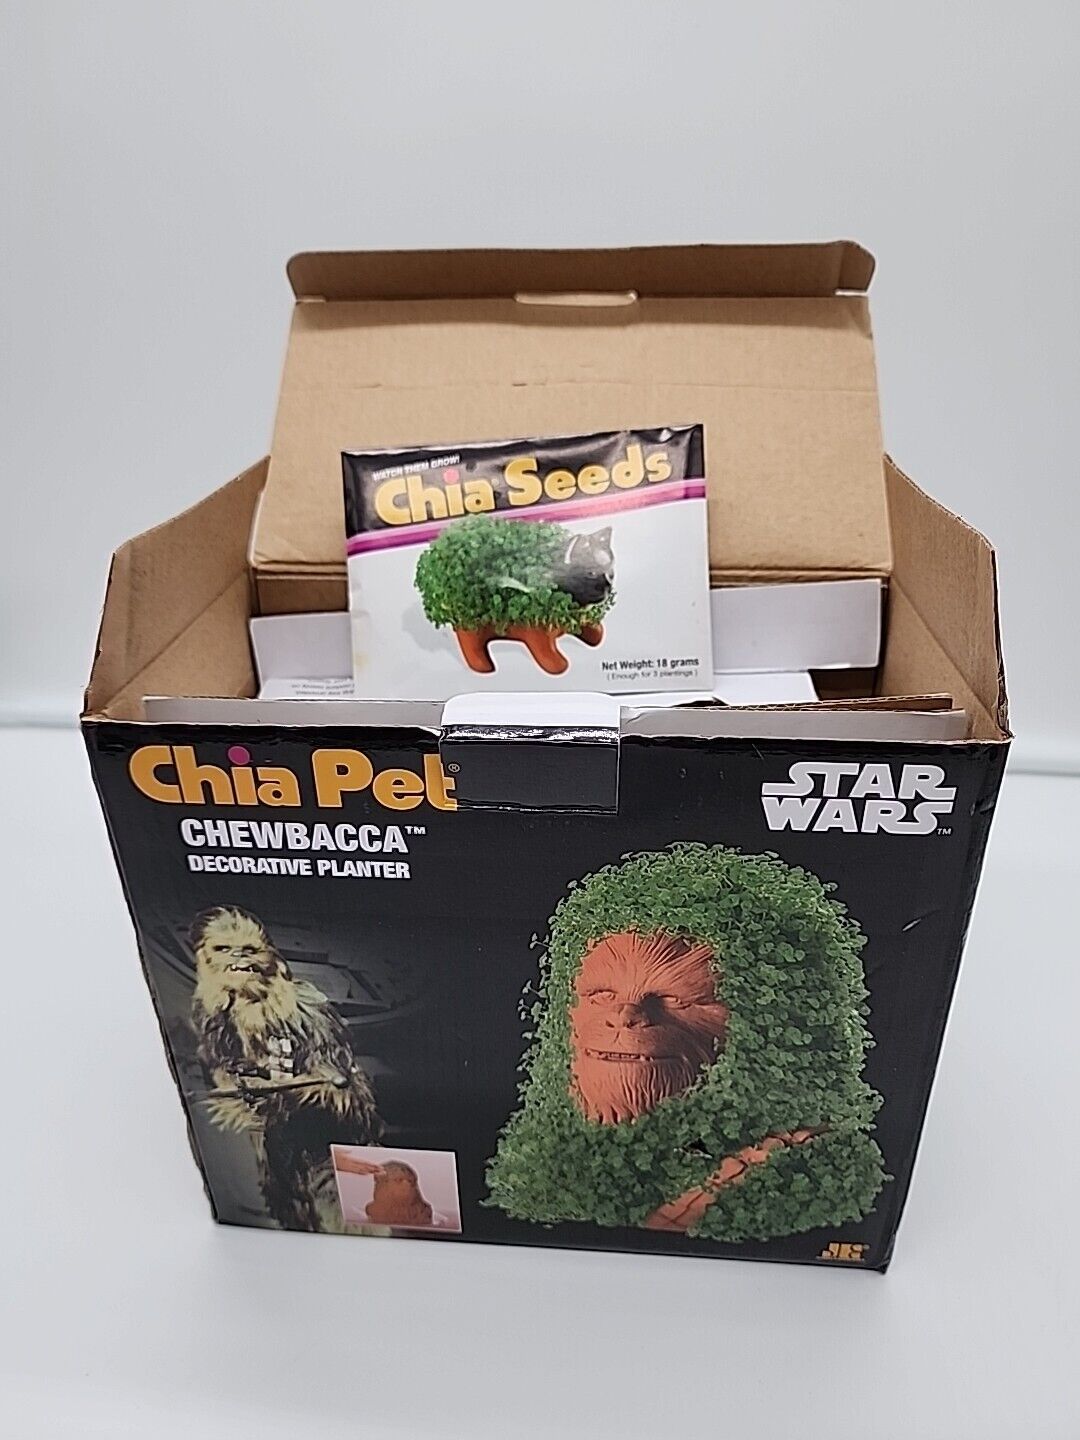 STAR WARS CHEWBACCA Chia Pet CP430-01 Seed Pack Decorative Pottery Planter NEW